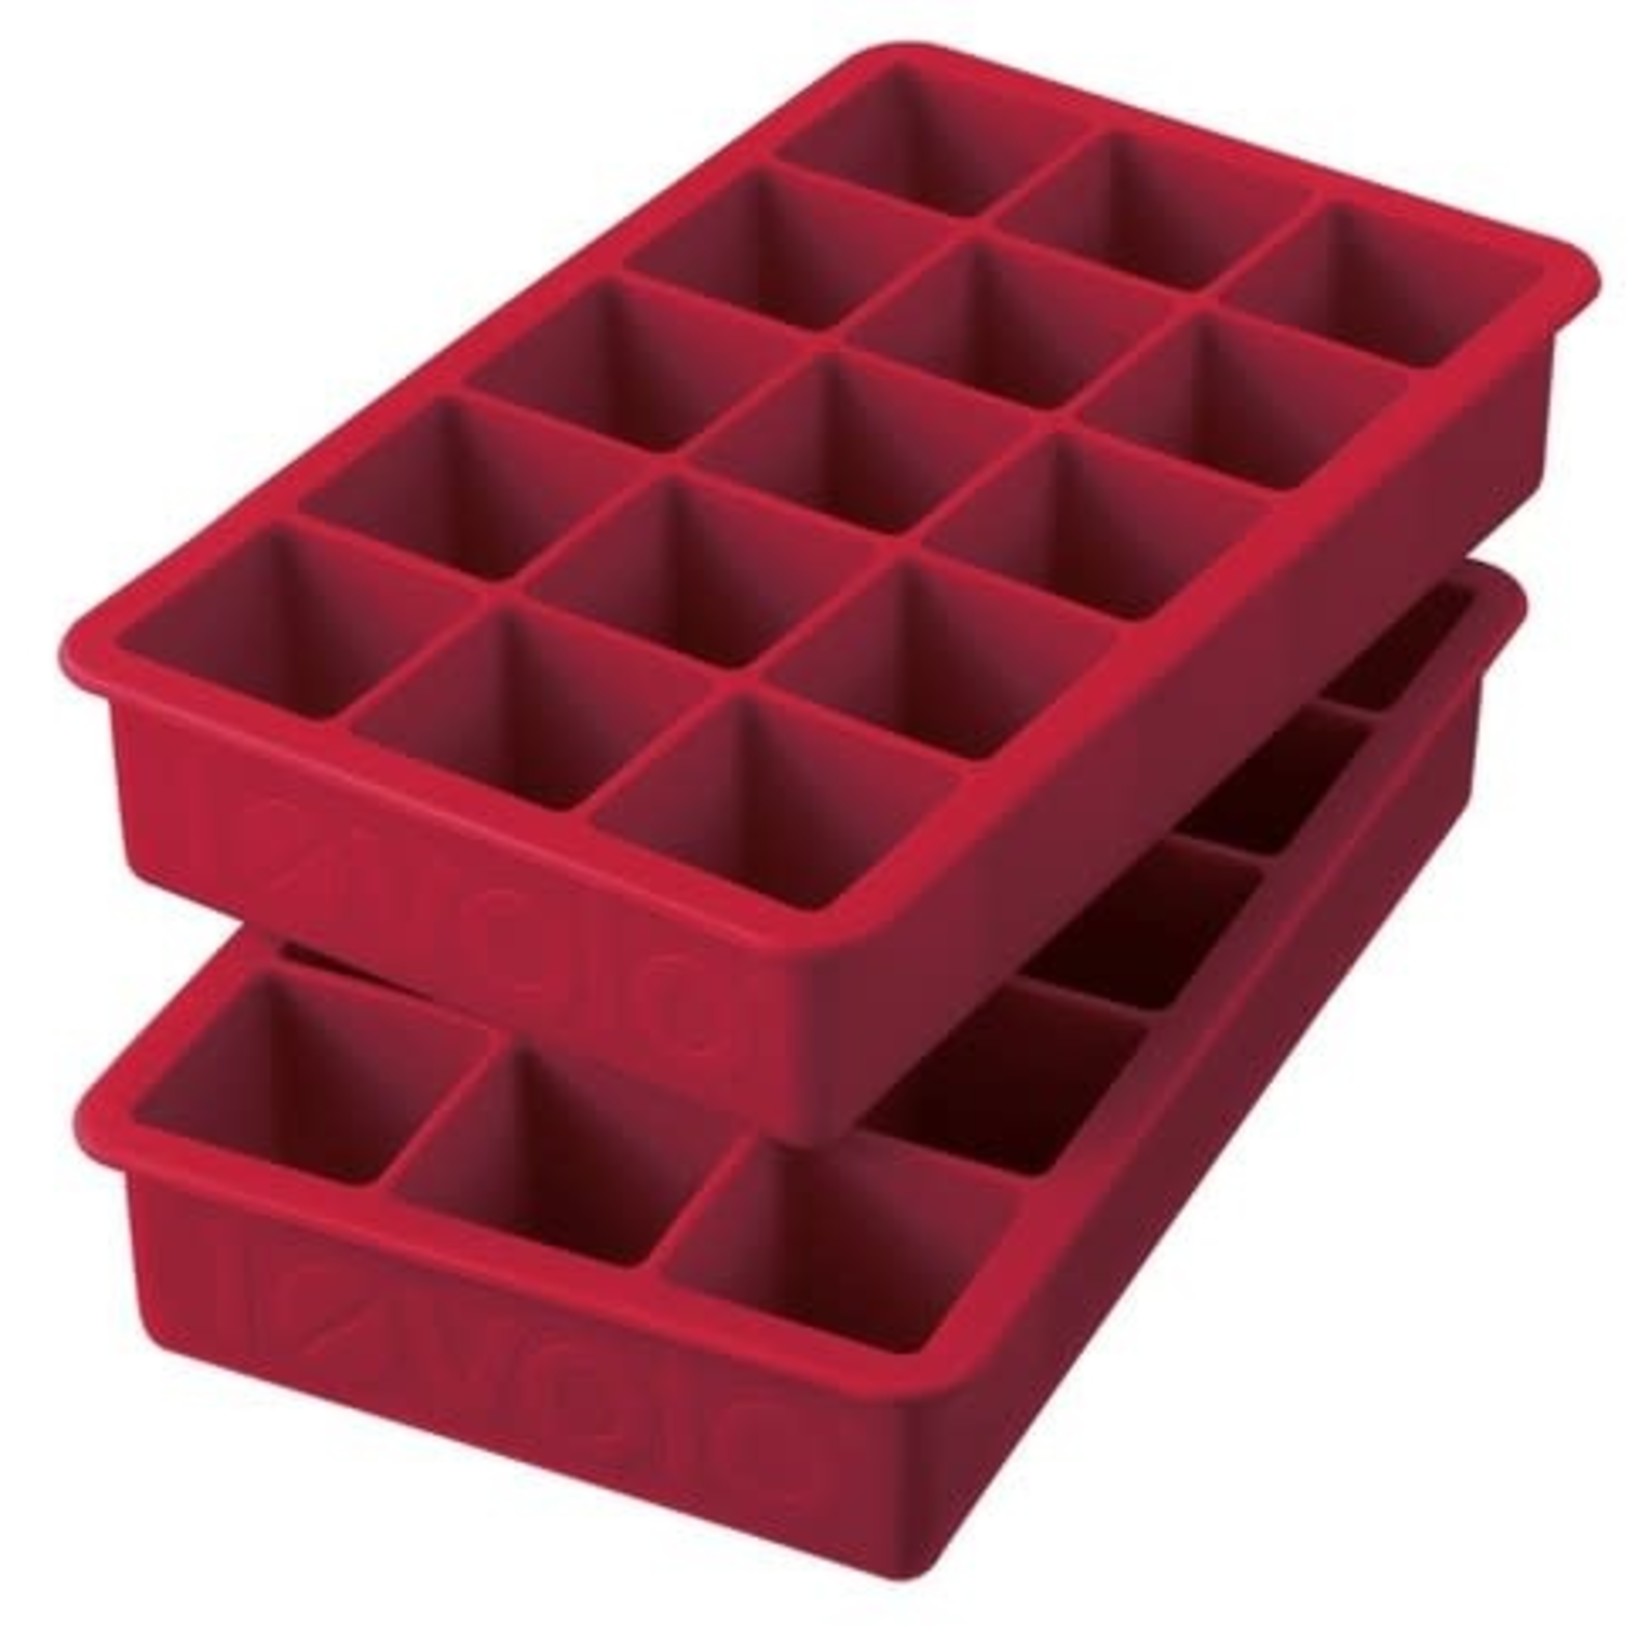 TOVOLO TOVOLO Perfect Ice Cube Trays S/2 - Cayenne